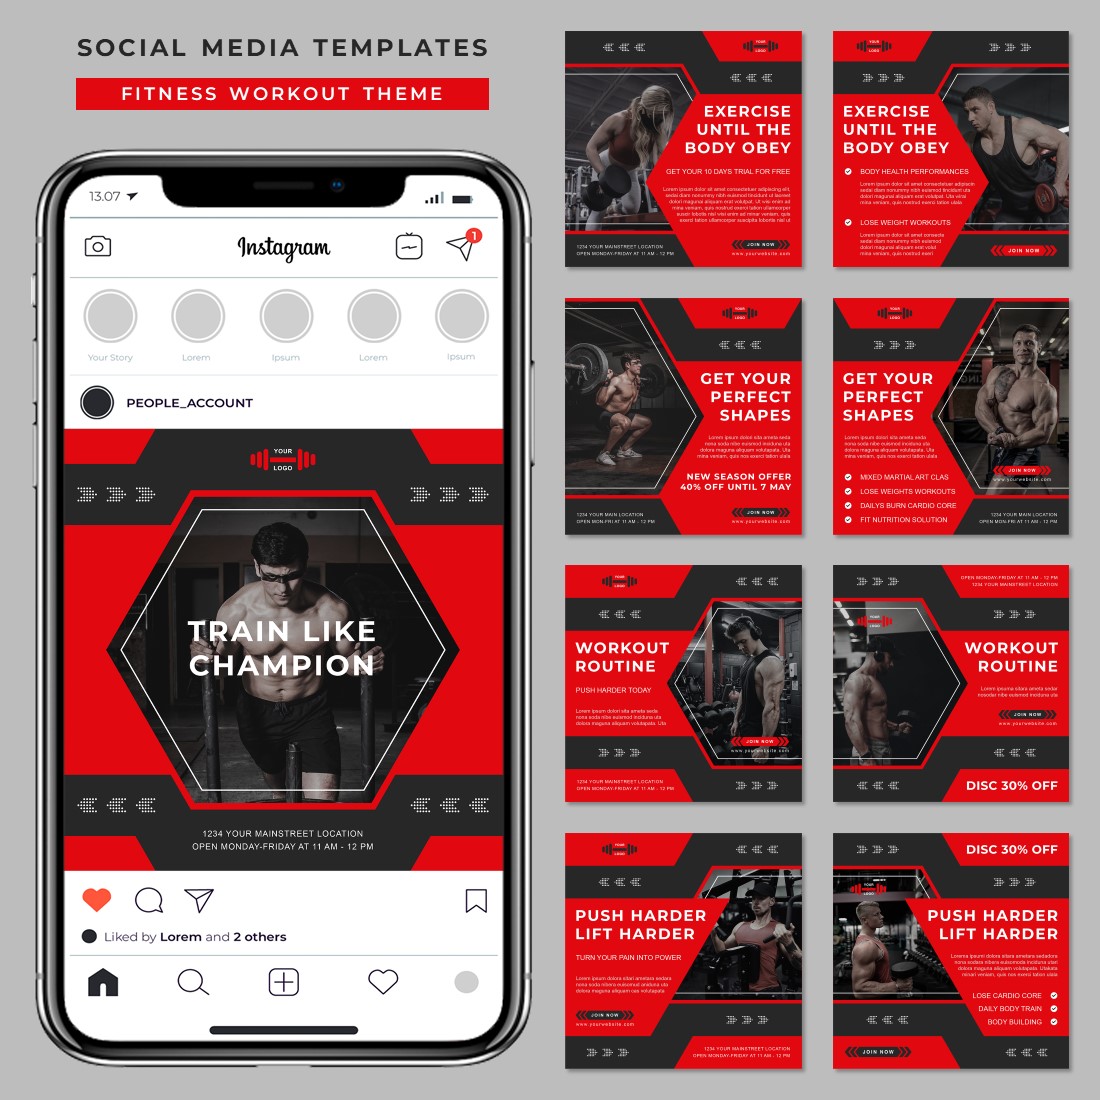 Fitness Workout Social Media Post Template - main image preview.